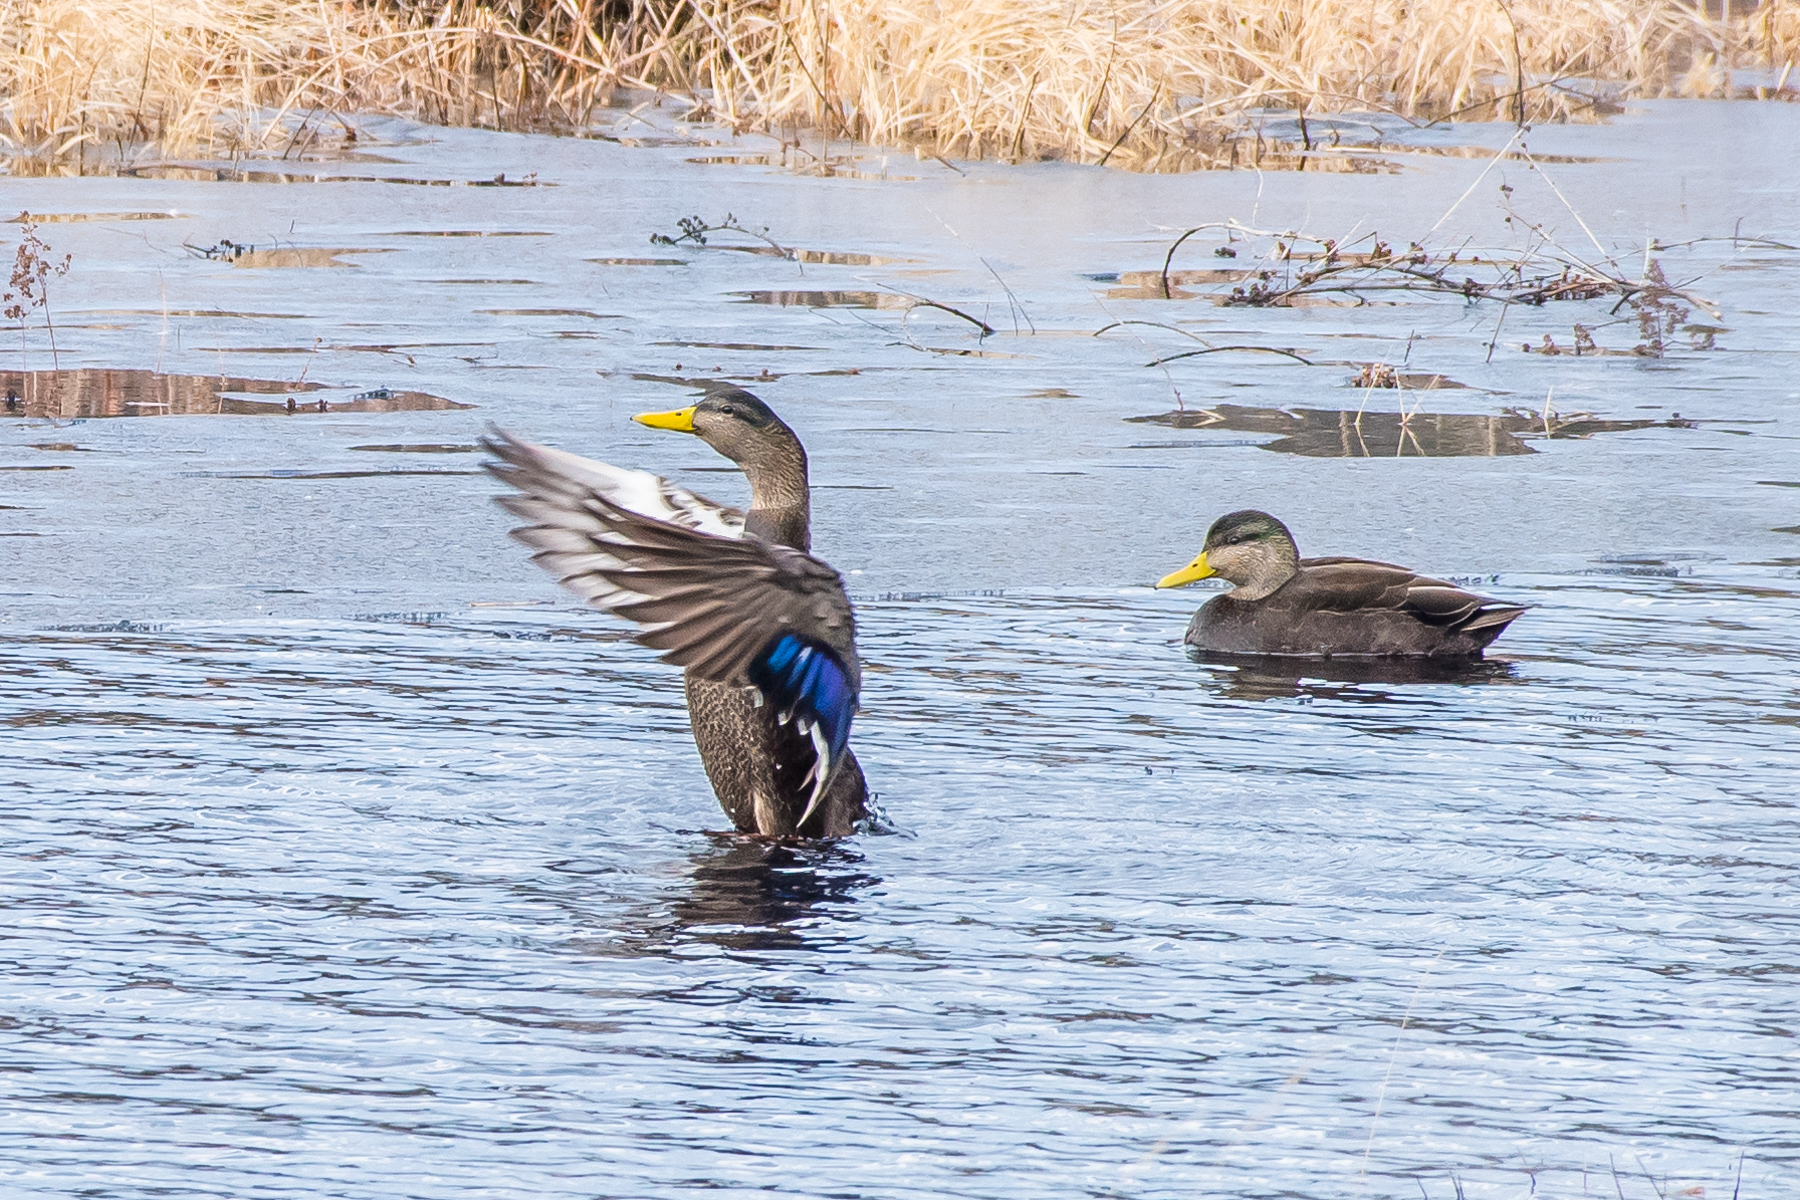   A pair of black ducks on one of the finally opened ice free beaver ponds in the Quabbin watershed. &nbsp;2/29/16  